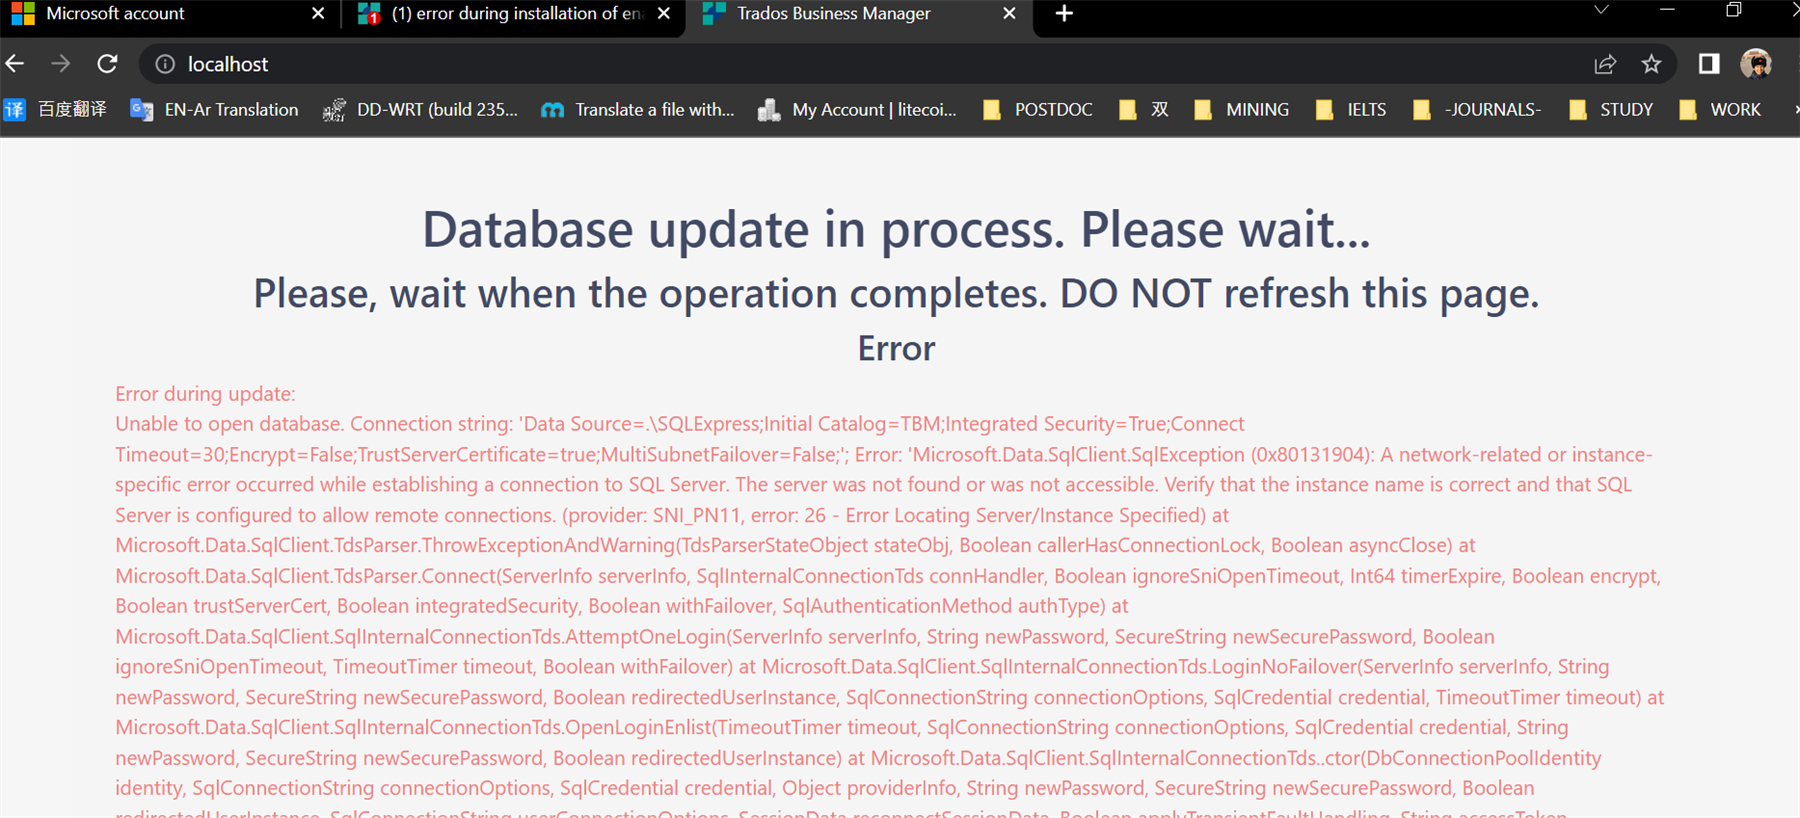 Screenshot of Trados Business Manager error message stating 'Database update in process. Please wait... Error during update: Unable to open database. Connection string: Data Source=.SQLExpress;Initial Catalog=TBM;Integrated Security=True;Connect Timeout=30;Encrypt=False;TrustServerCertificate=true;MultiSubnetFailover=False; Error: Microsoft.Data.SqlClient.SqlException: A network-related or instance-specific error occurred while establishing a connection to SQL Server. The server was not found or was not accessible. Verify that the instance name is correct and that SQL Server is configured to allow remote connections. (provider: SNI_PN11, error: 26 - Error Locating ServerInstance Specified)'